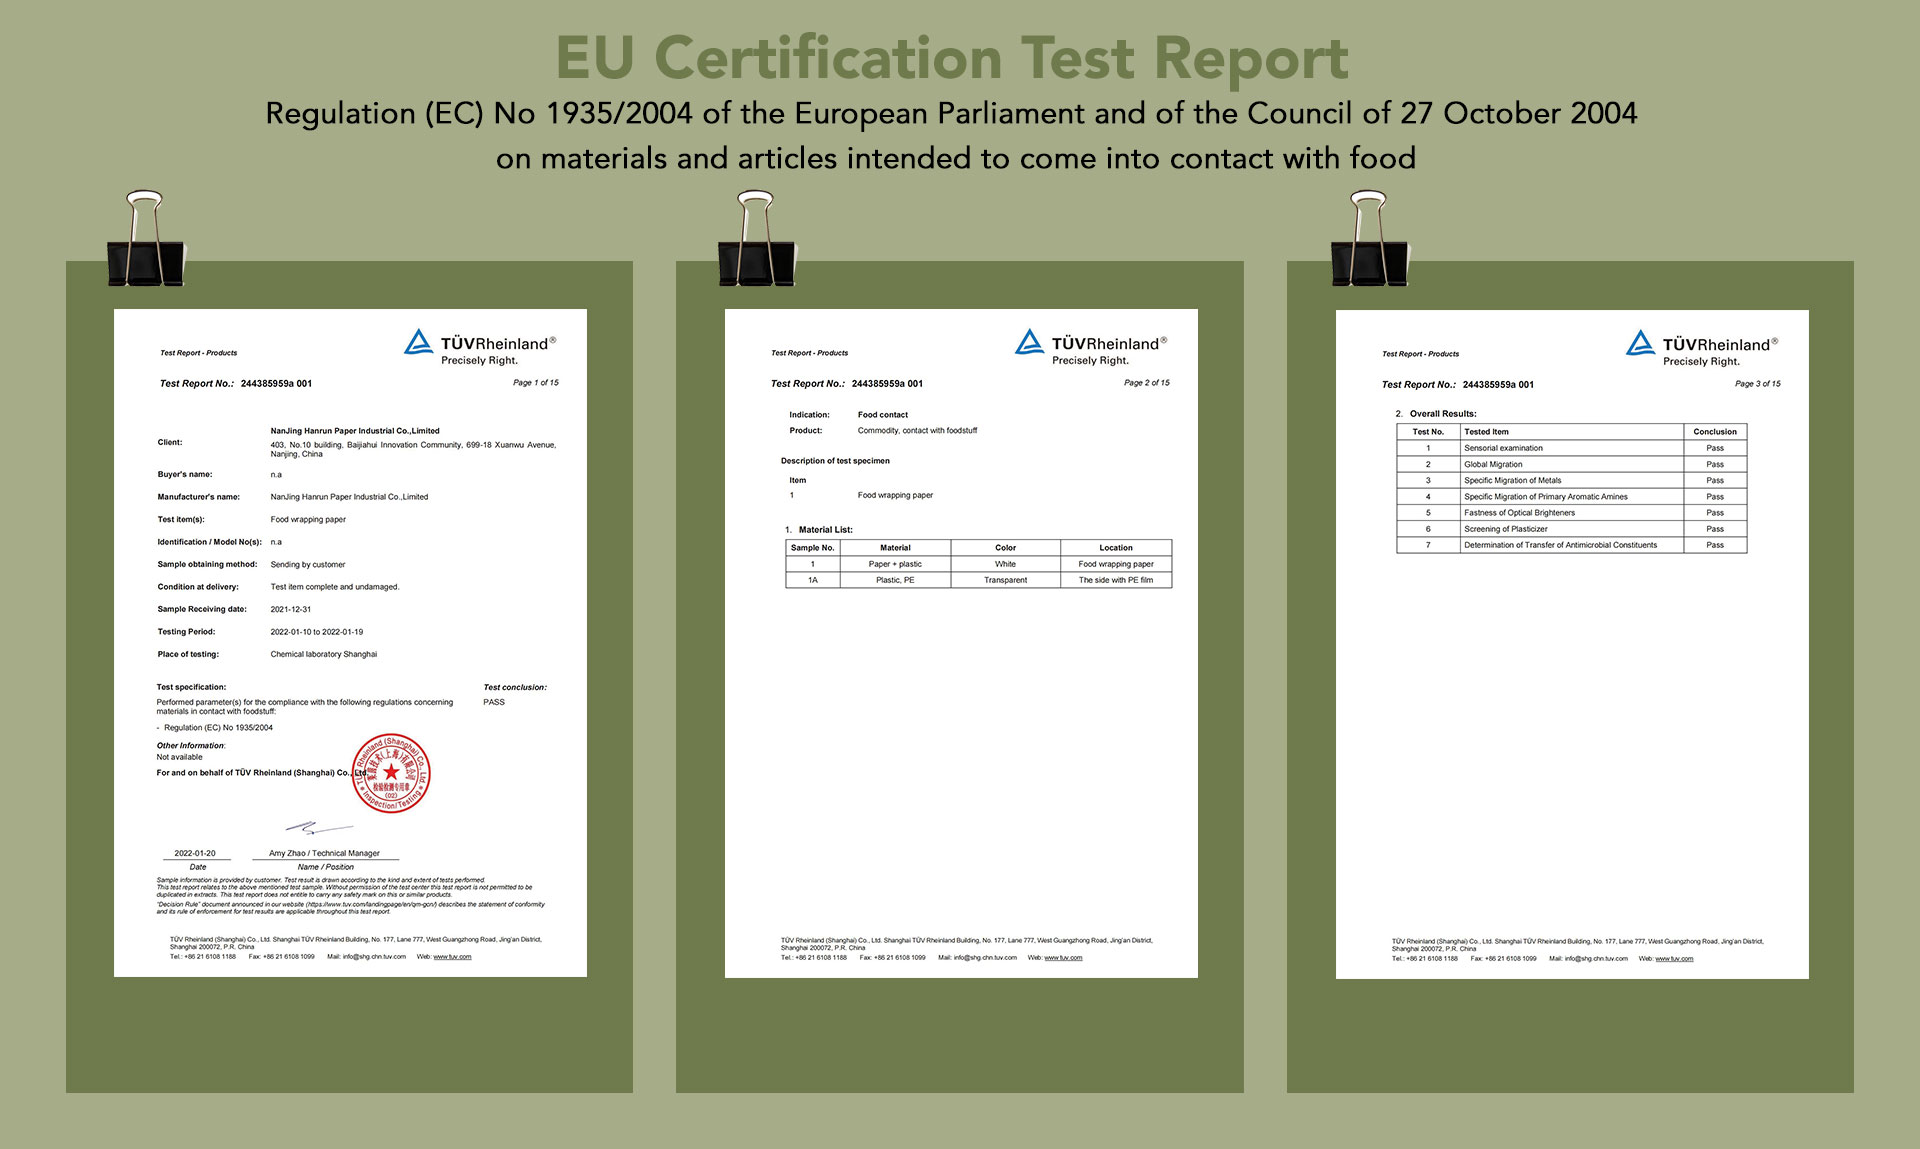 EU Certification Test Report Regulation (EC) No 1935/2004 of the European Parliament and of the Council of 27 October 2004  on materials and articles intended to come into contact with food